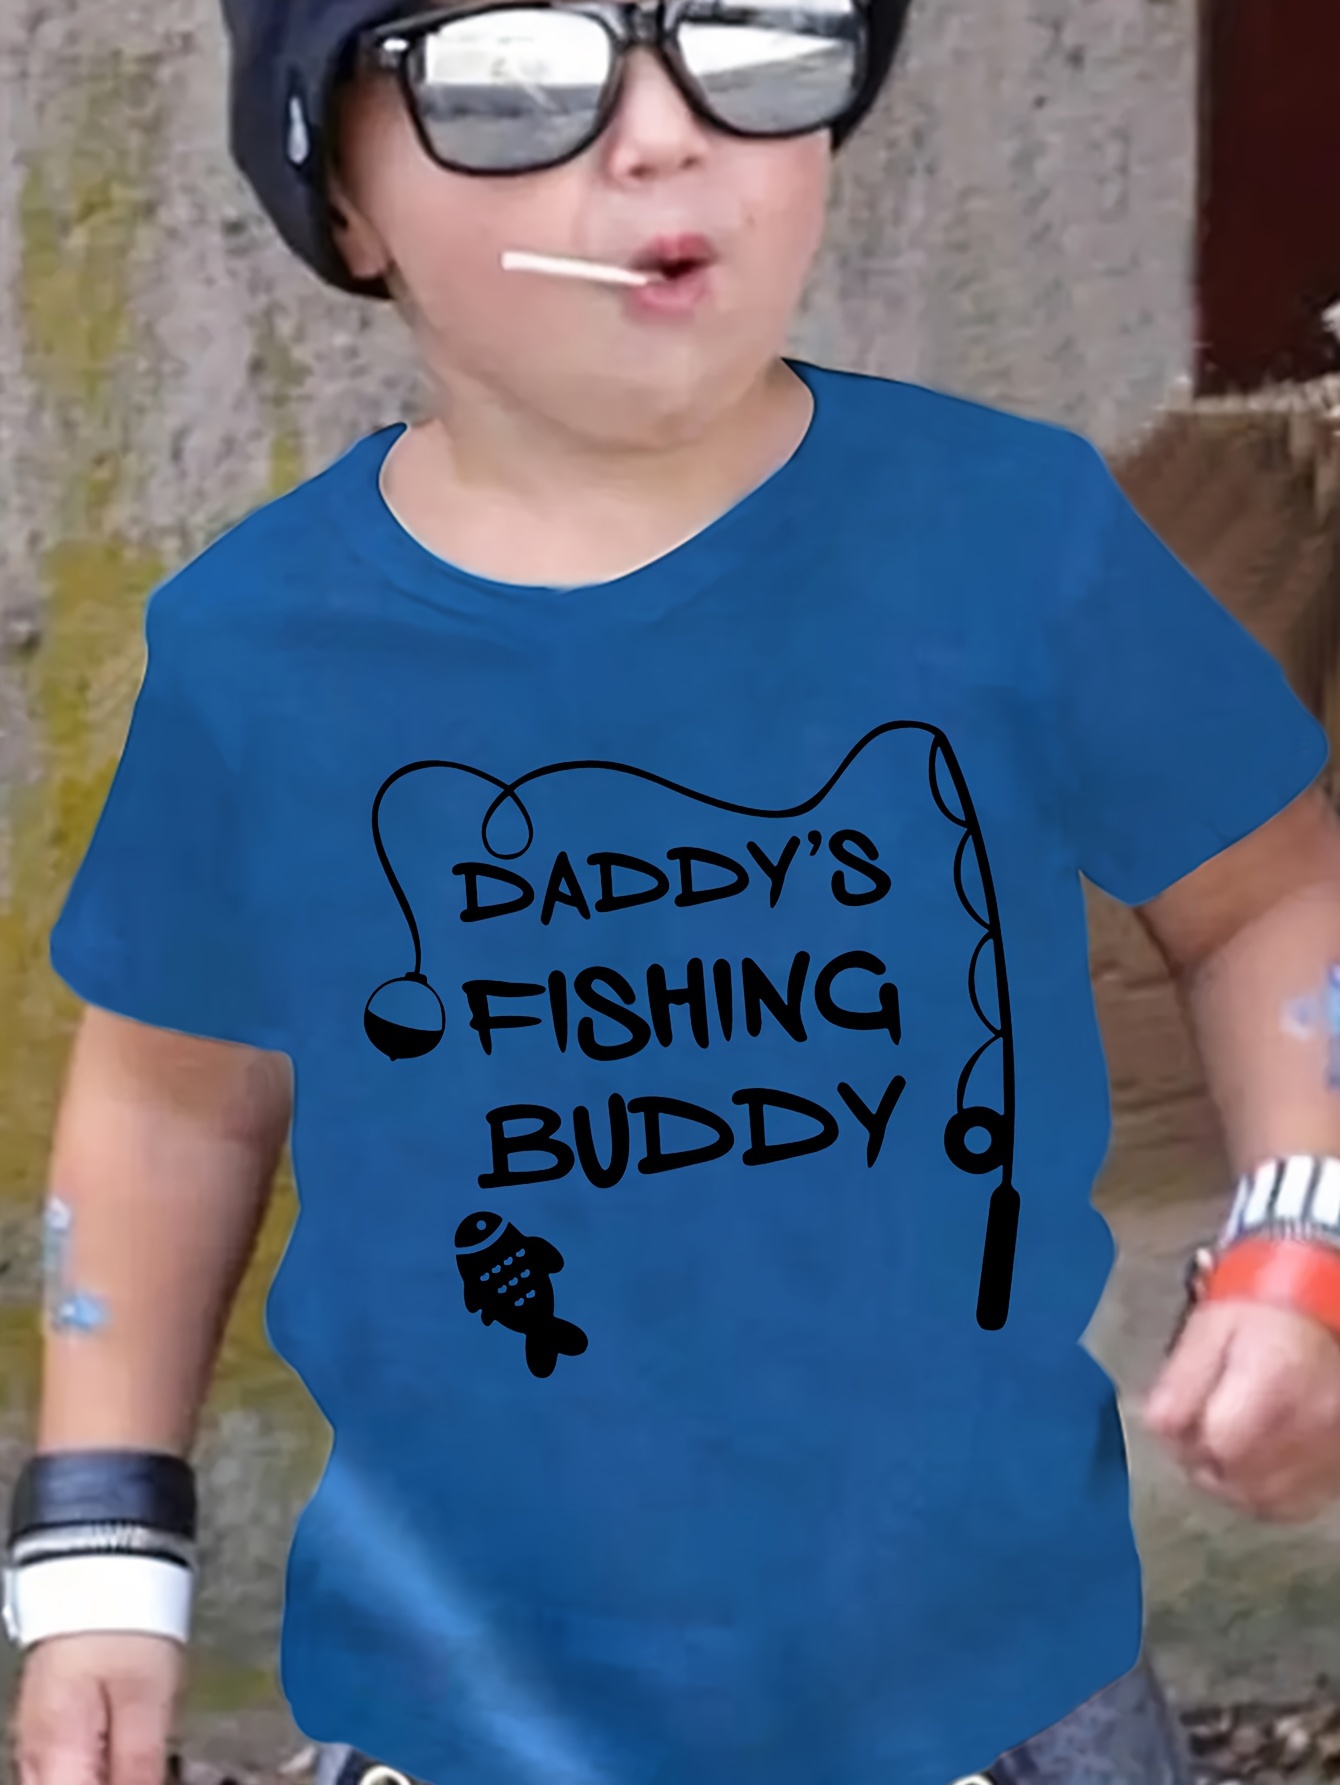 DADDY'S FISHING BUDDY Print Boys Creative T-Shirt, Trendy Versatile &  Comfortable Short Sleeve Tee For Toddler Kids, As Gift